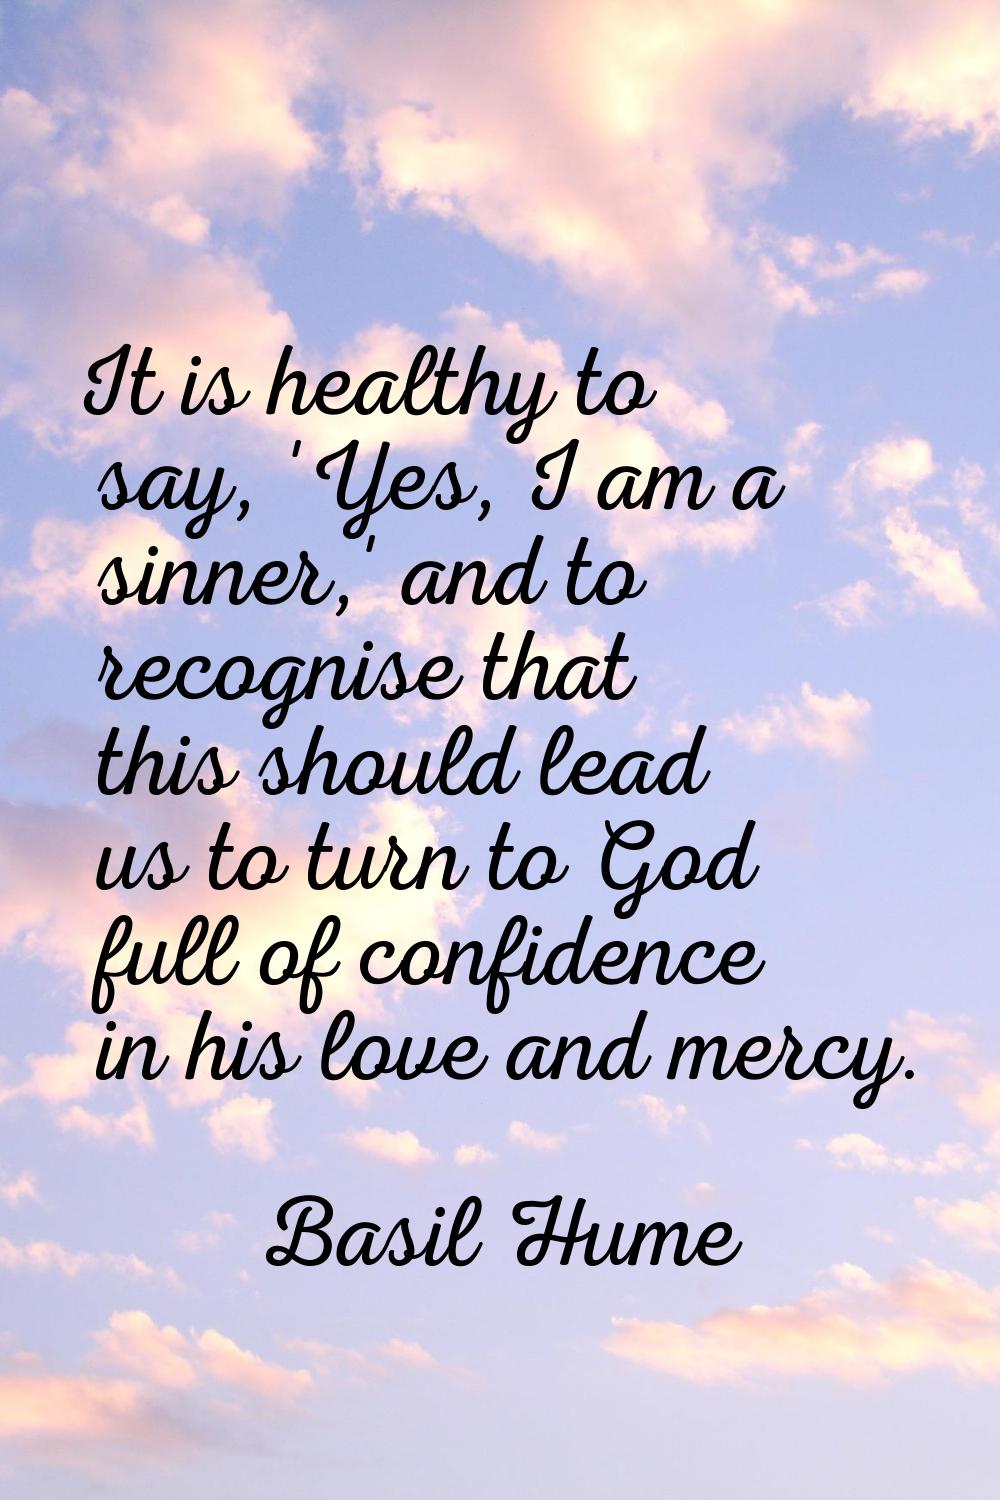 It is healthy to say, 'Yes, I am a sinner,' and to recognise that this should lead us to turn to Go